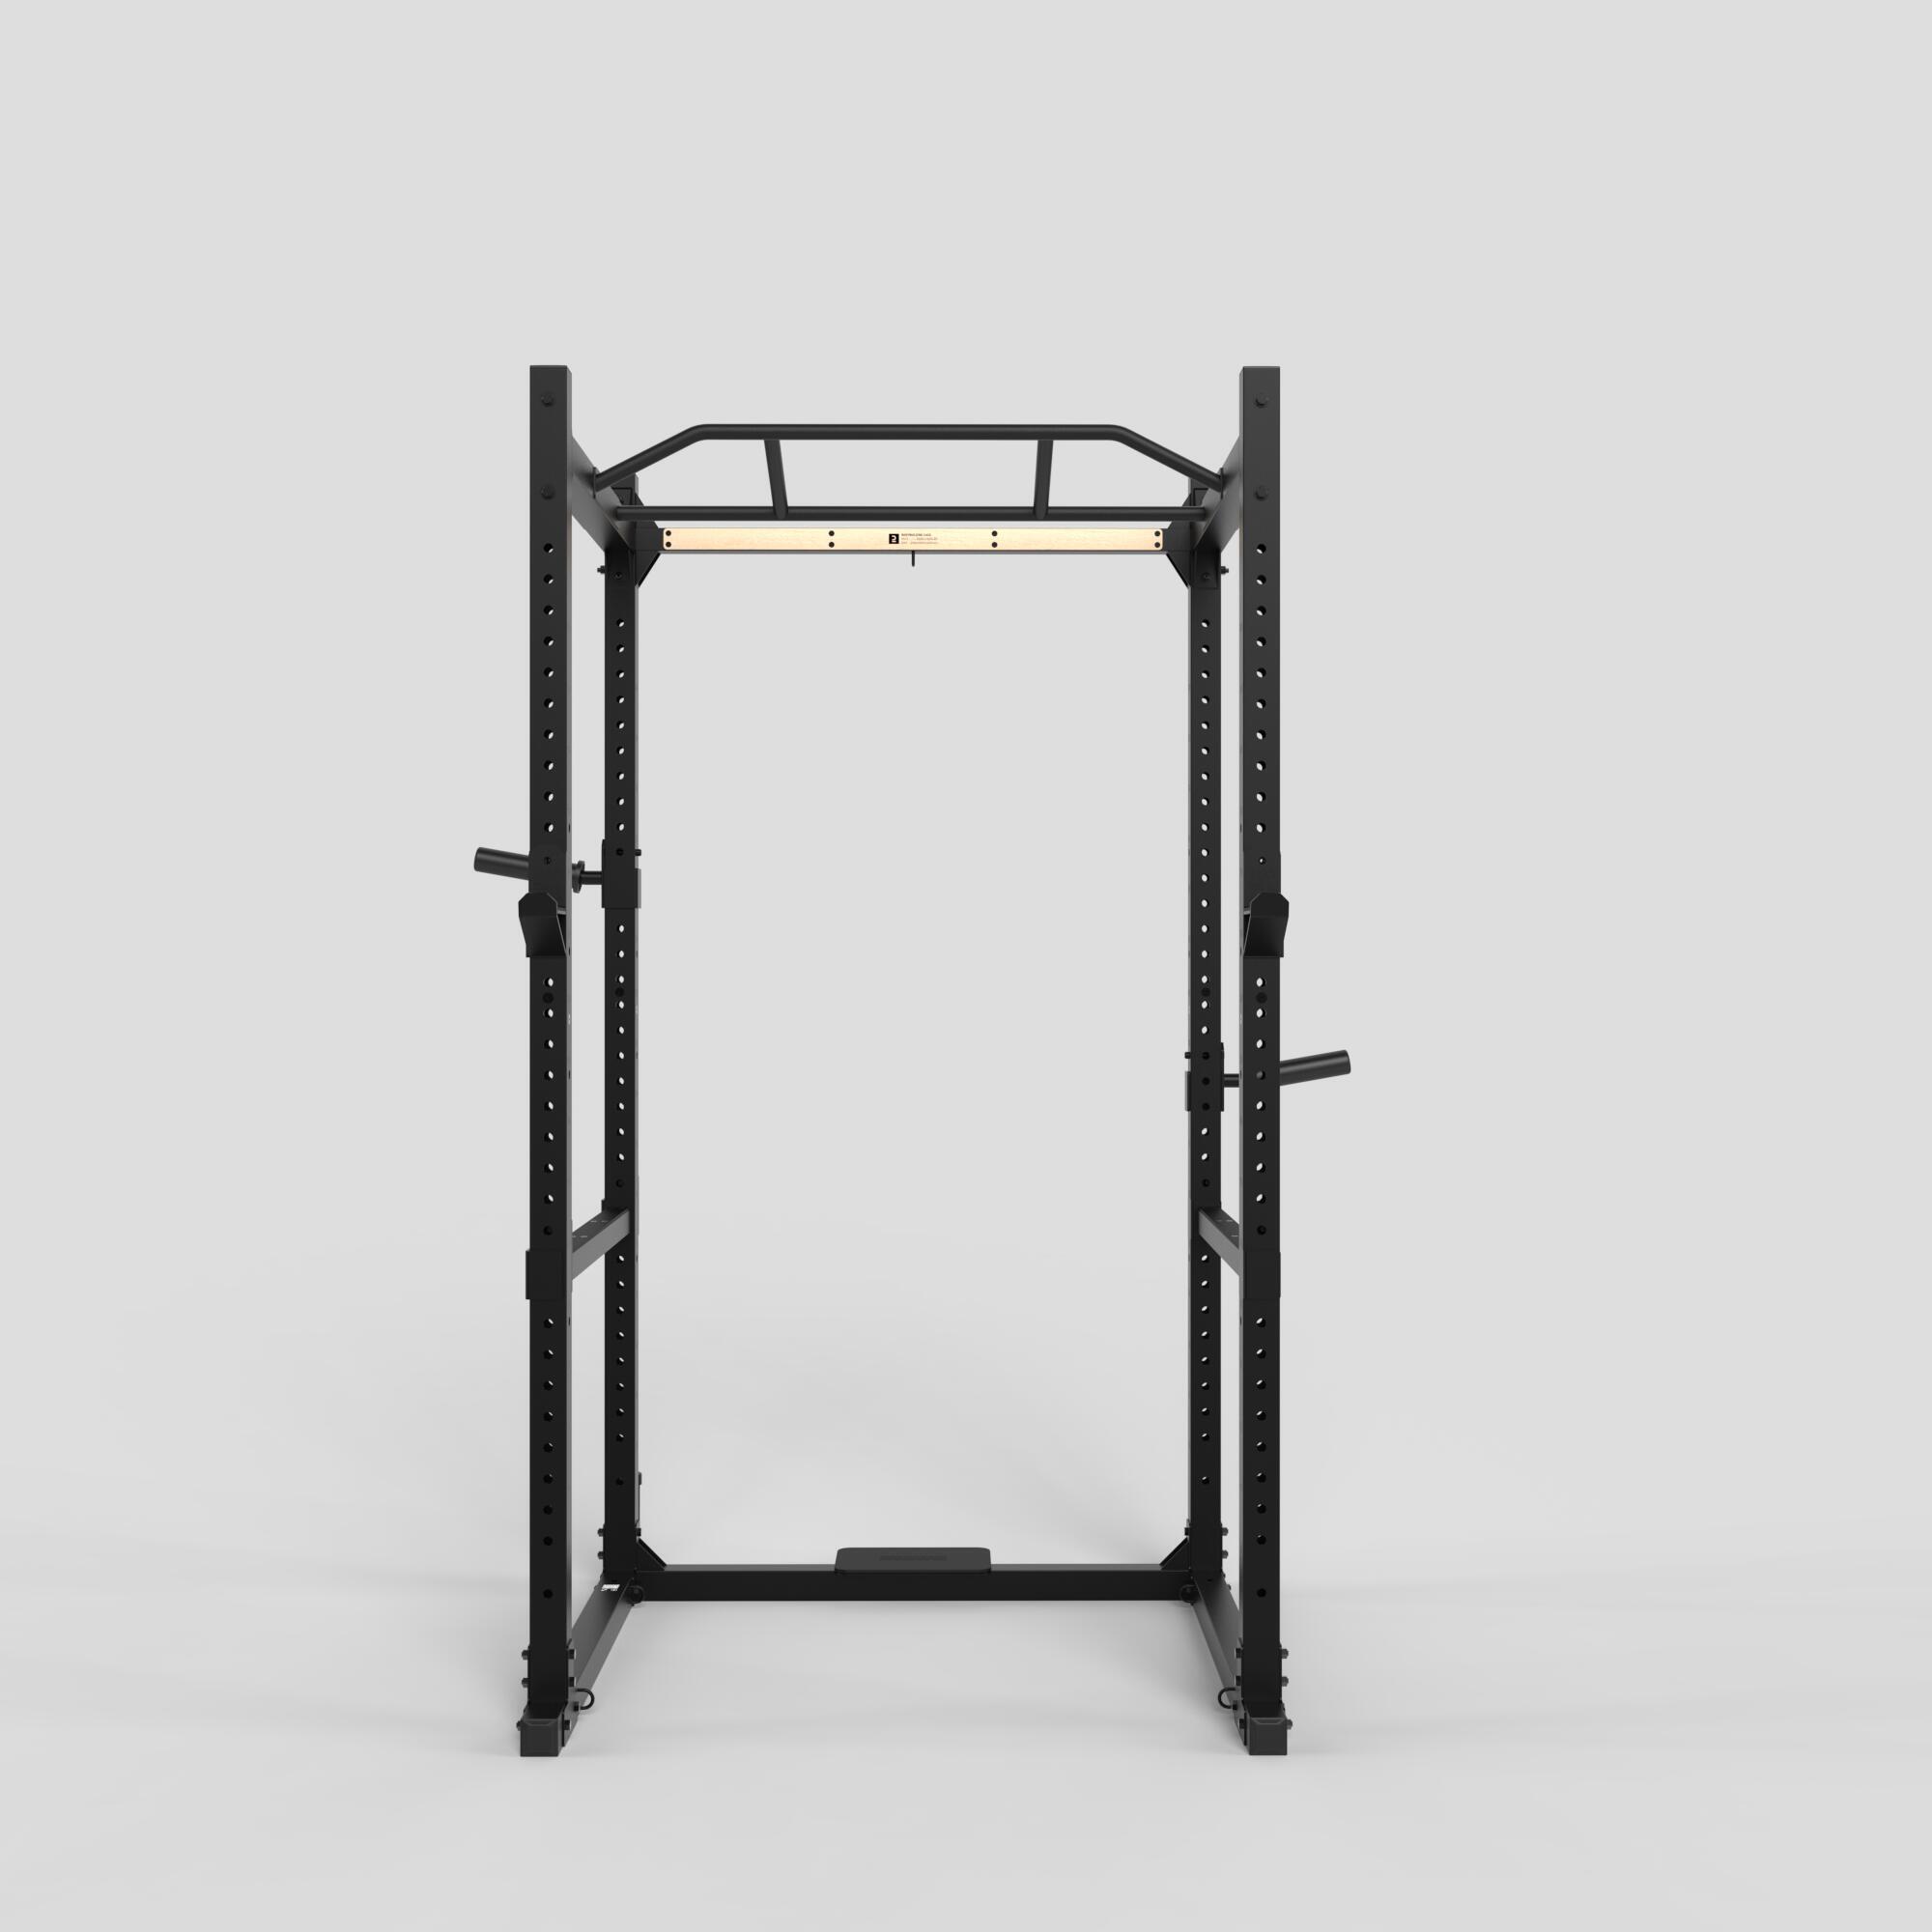 Weight Training Cage - Rack Body 900 4/9